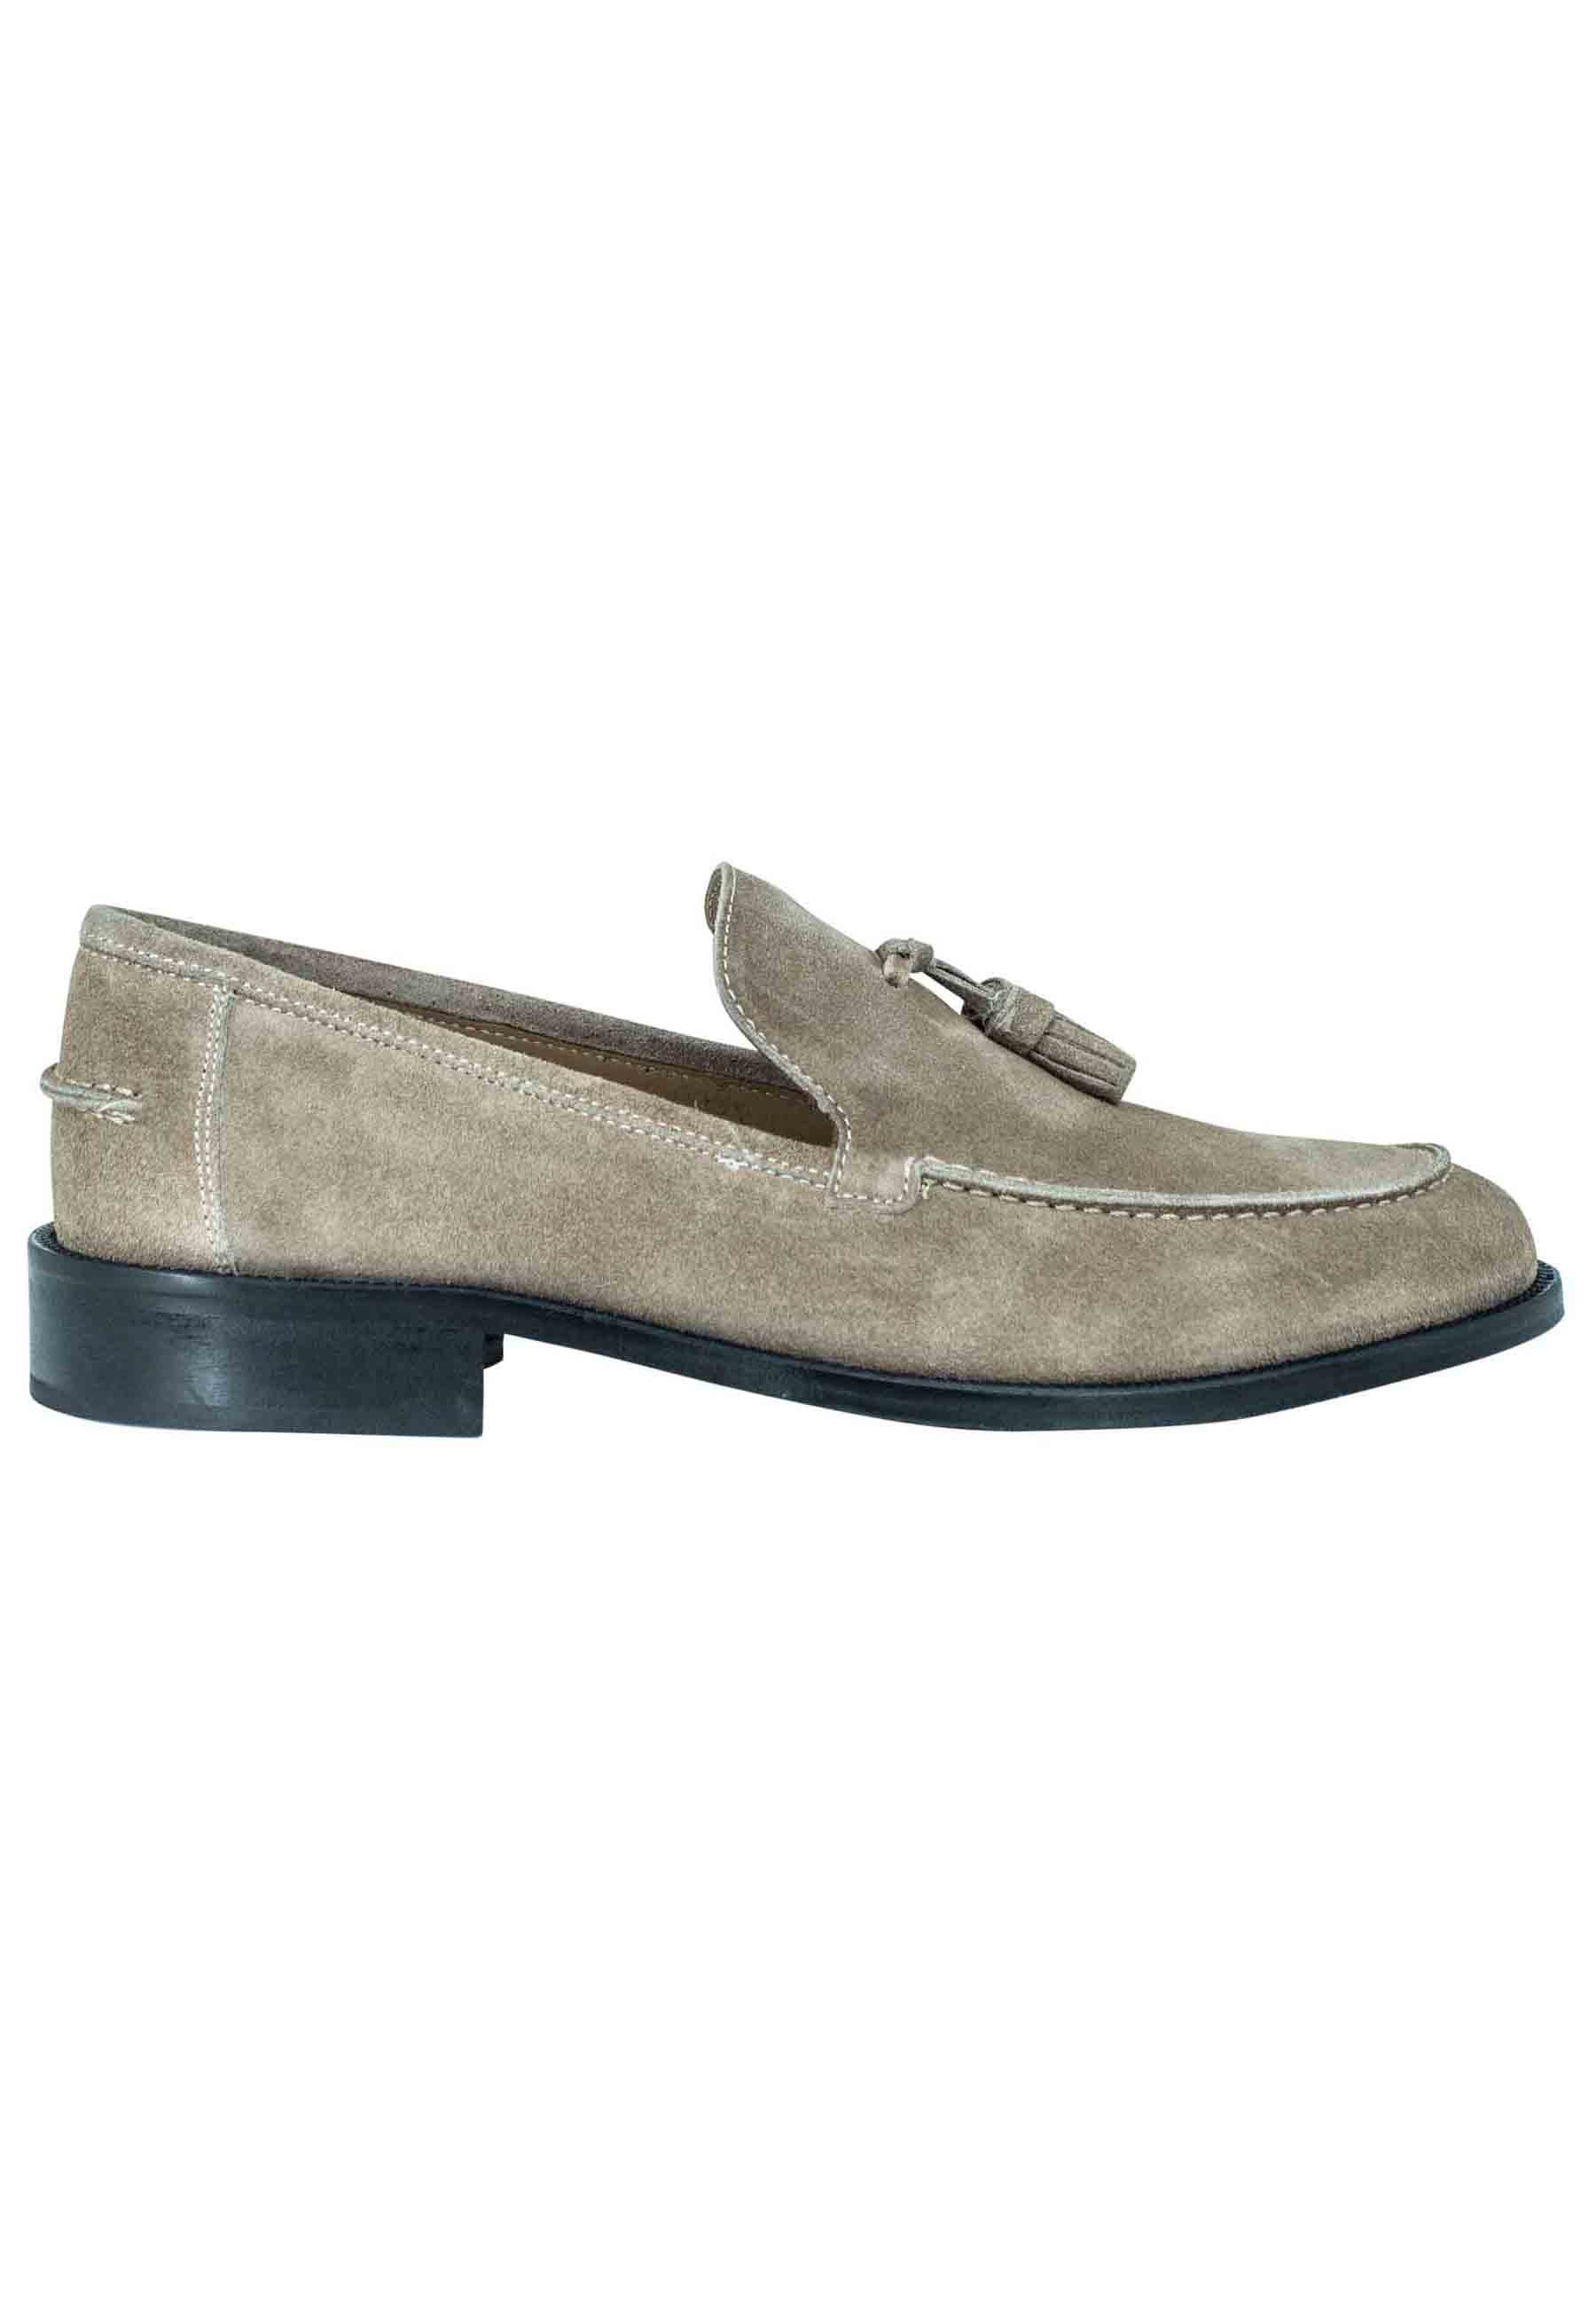 Men's moccasins in taupe suede with tassels and stitched leather sole